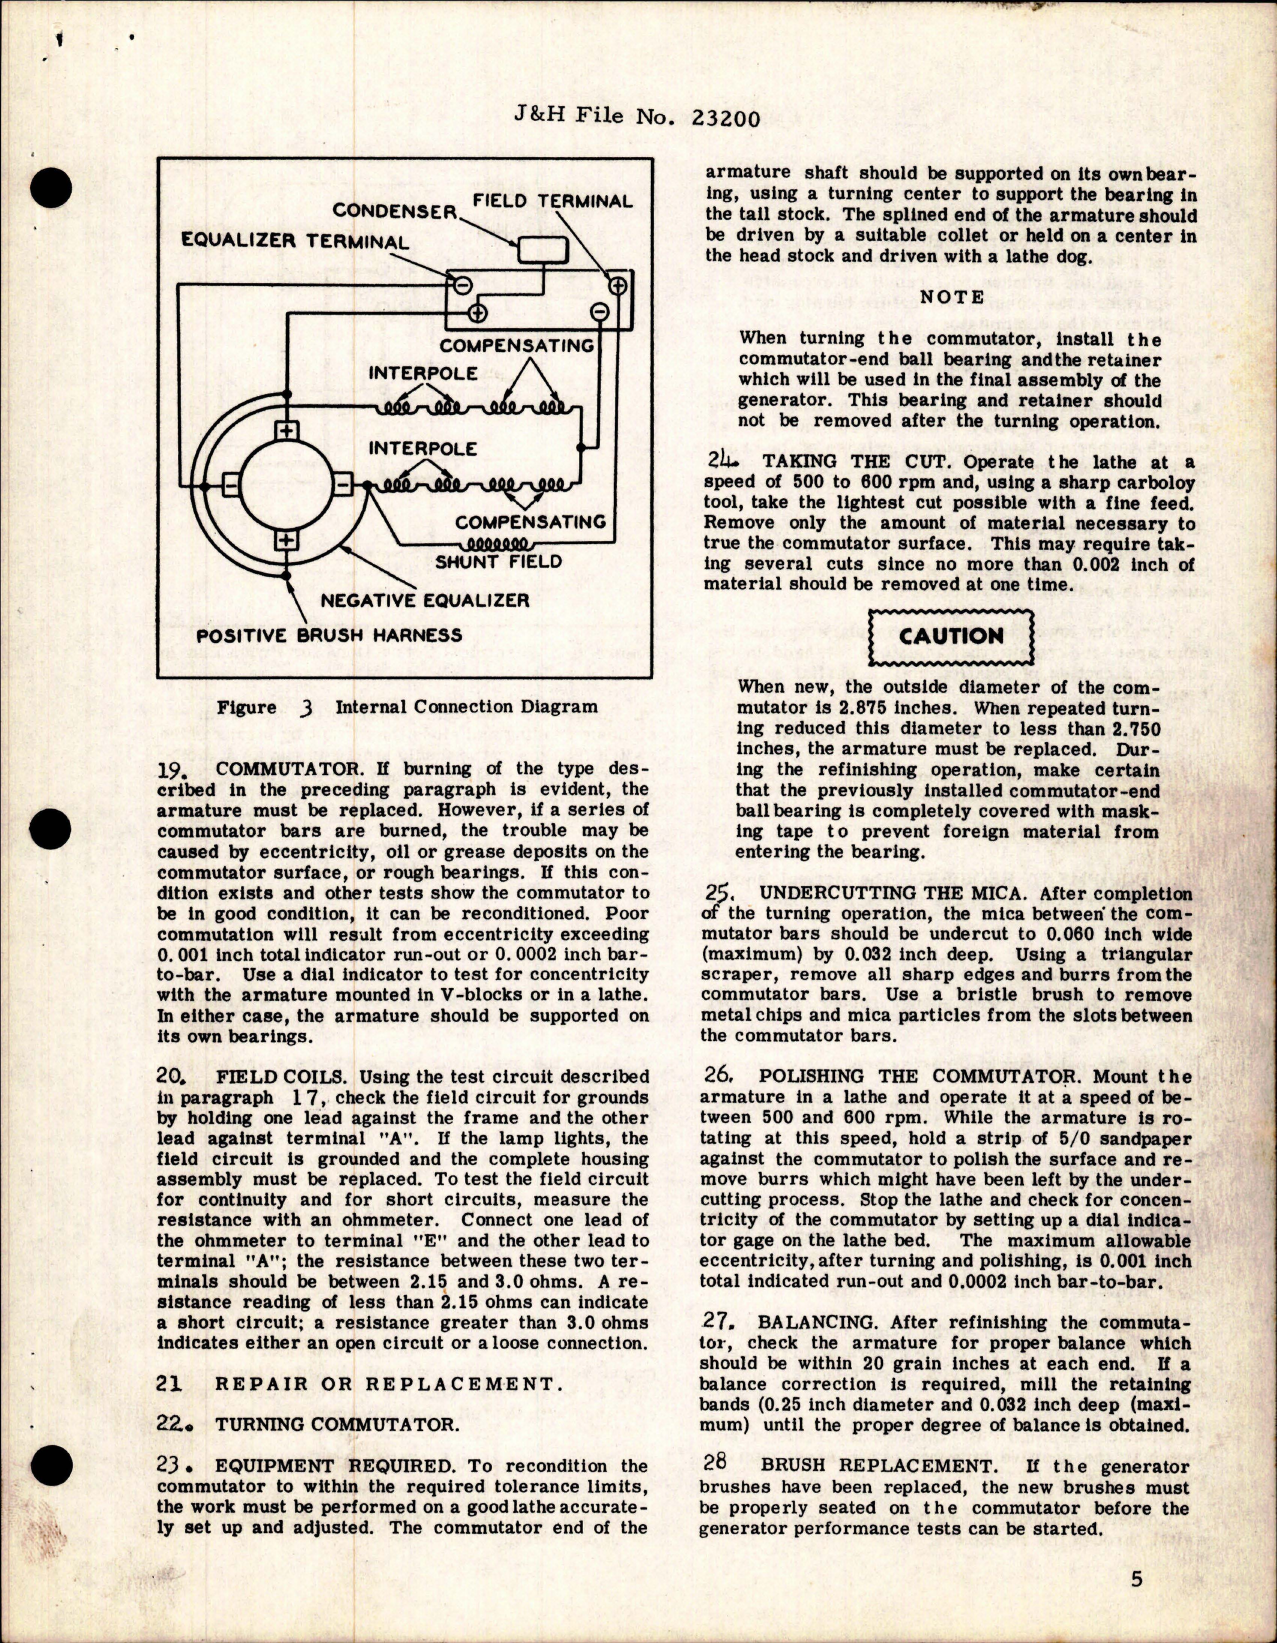 Sample page 7 from AirCorps Library document: Overhaul Instructions with Parts Breakdown for Starter Generators 